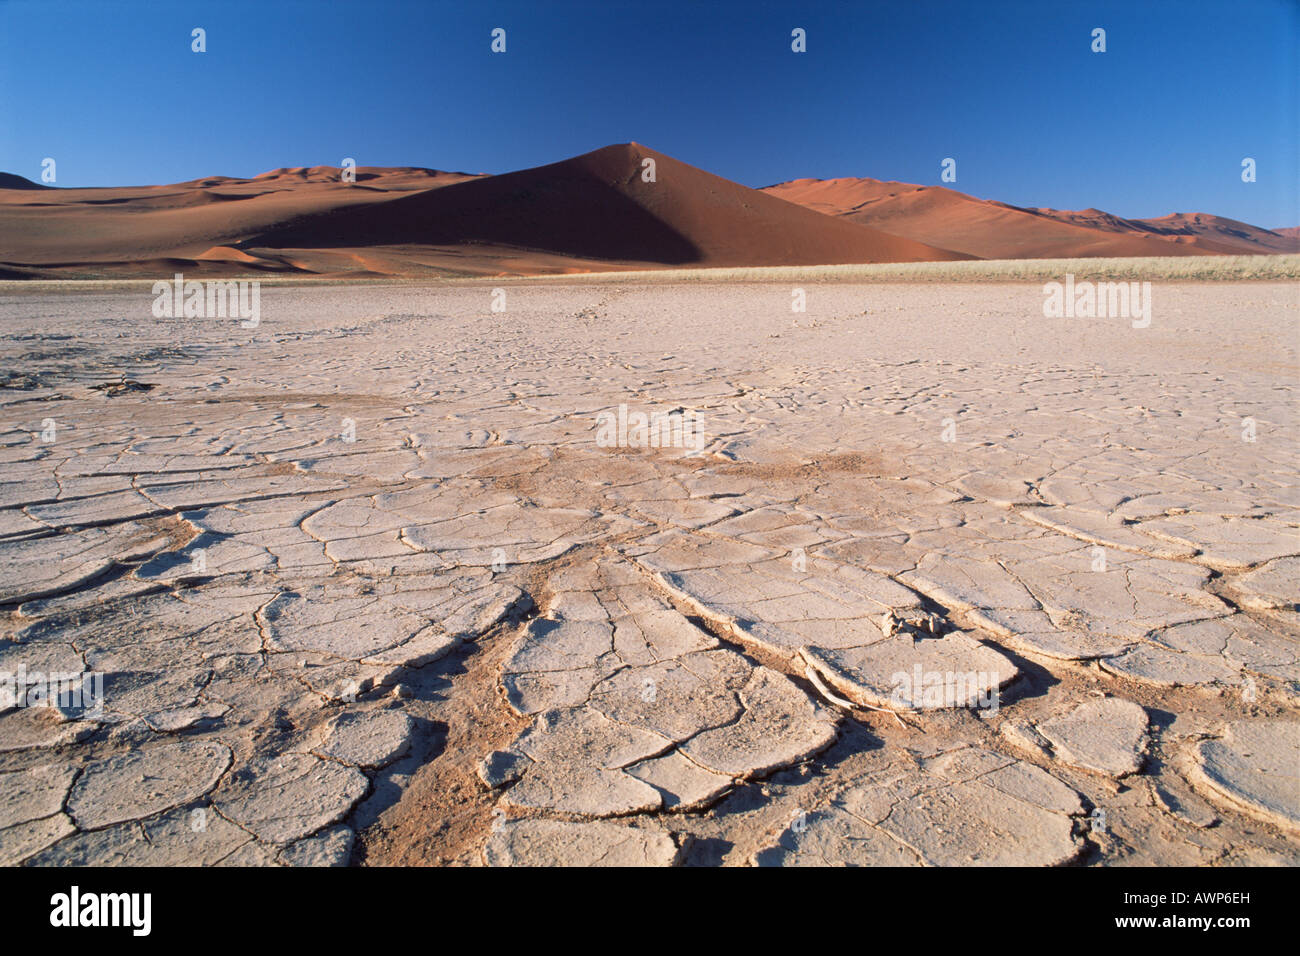 Dried, cracked earth in front of a star dune, Sossusvlei, Namibia, Africa Stock Photo